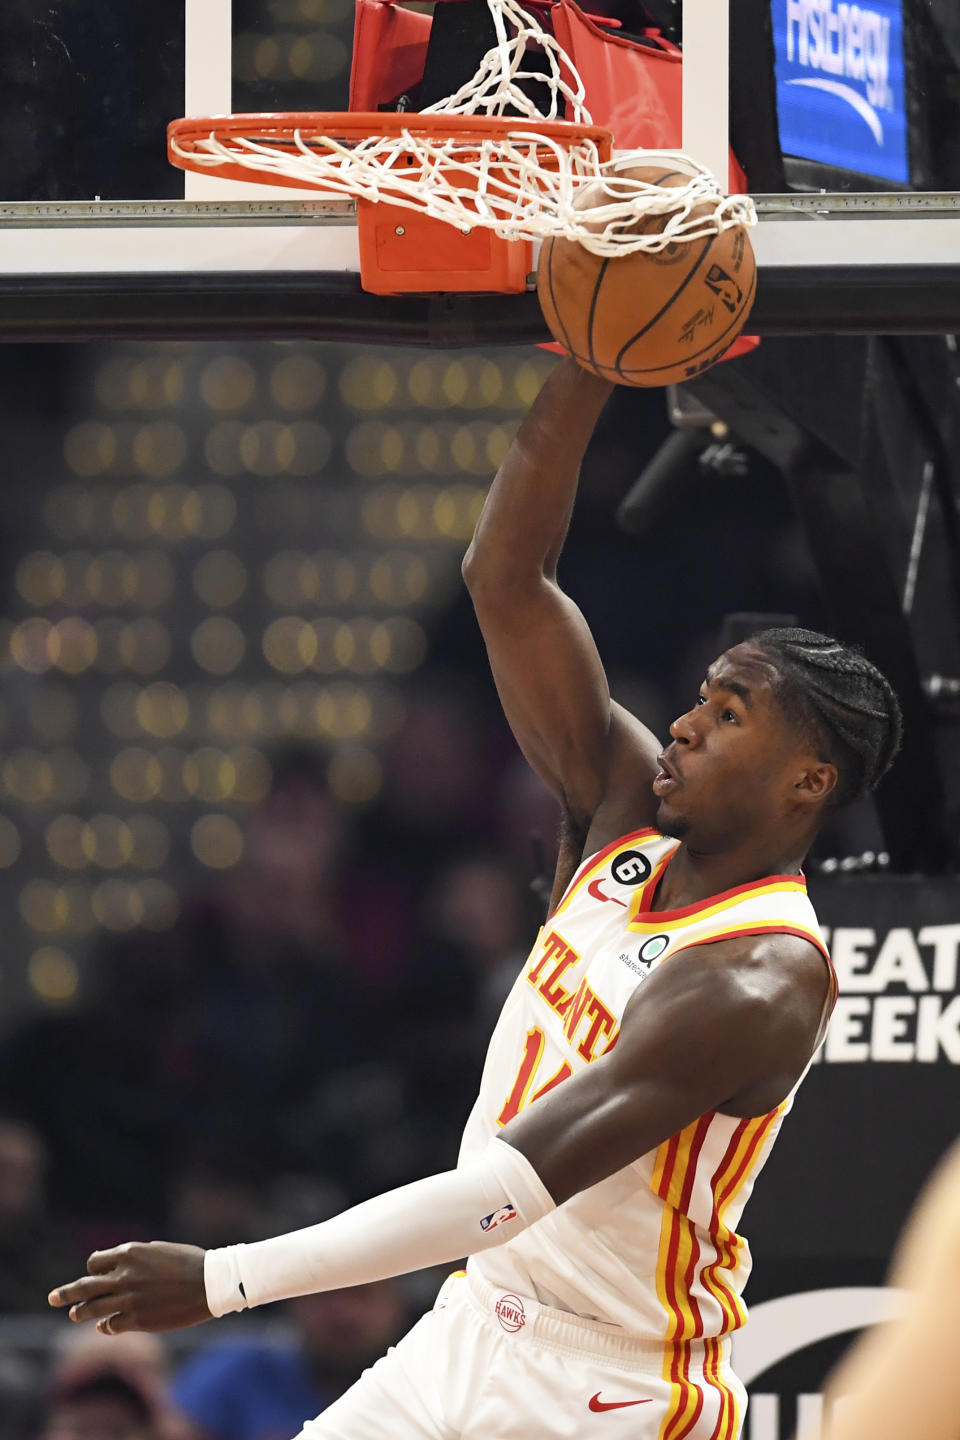 Atlanta Hawks forward AJ Griffin dunks during the first half of an NBA basketball game against the Cleveland Cavaliers, Monday, Nov. 21, 2022, in Cleveland. (AP Photo/Nick Cammett)